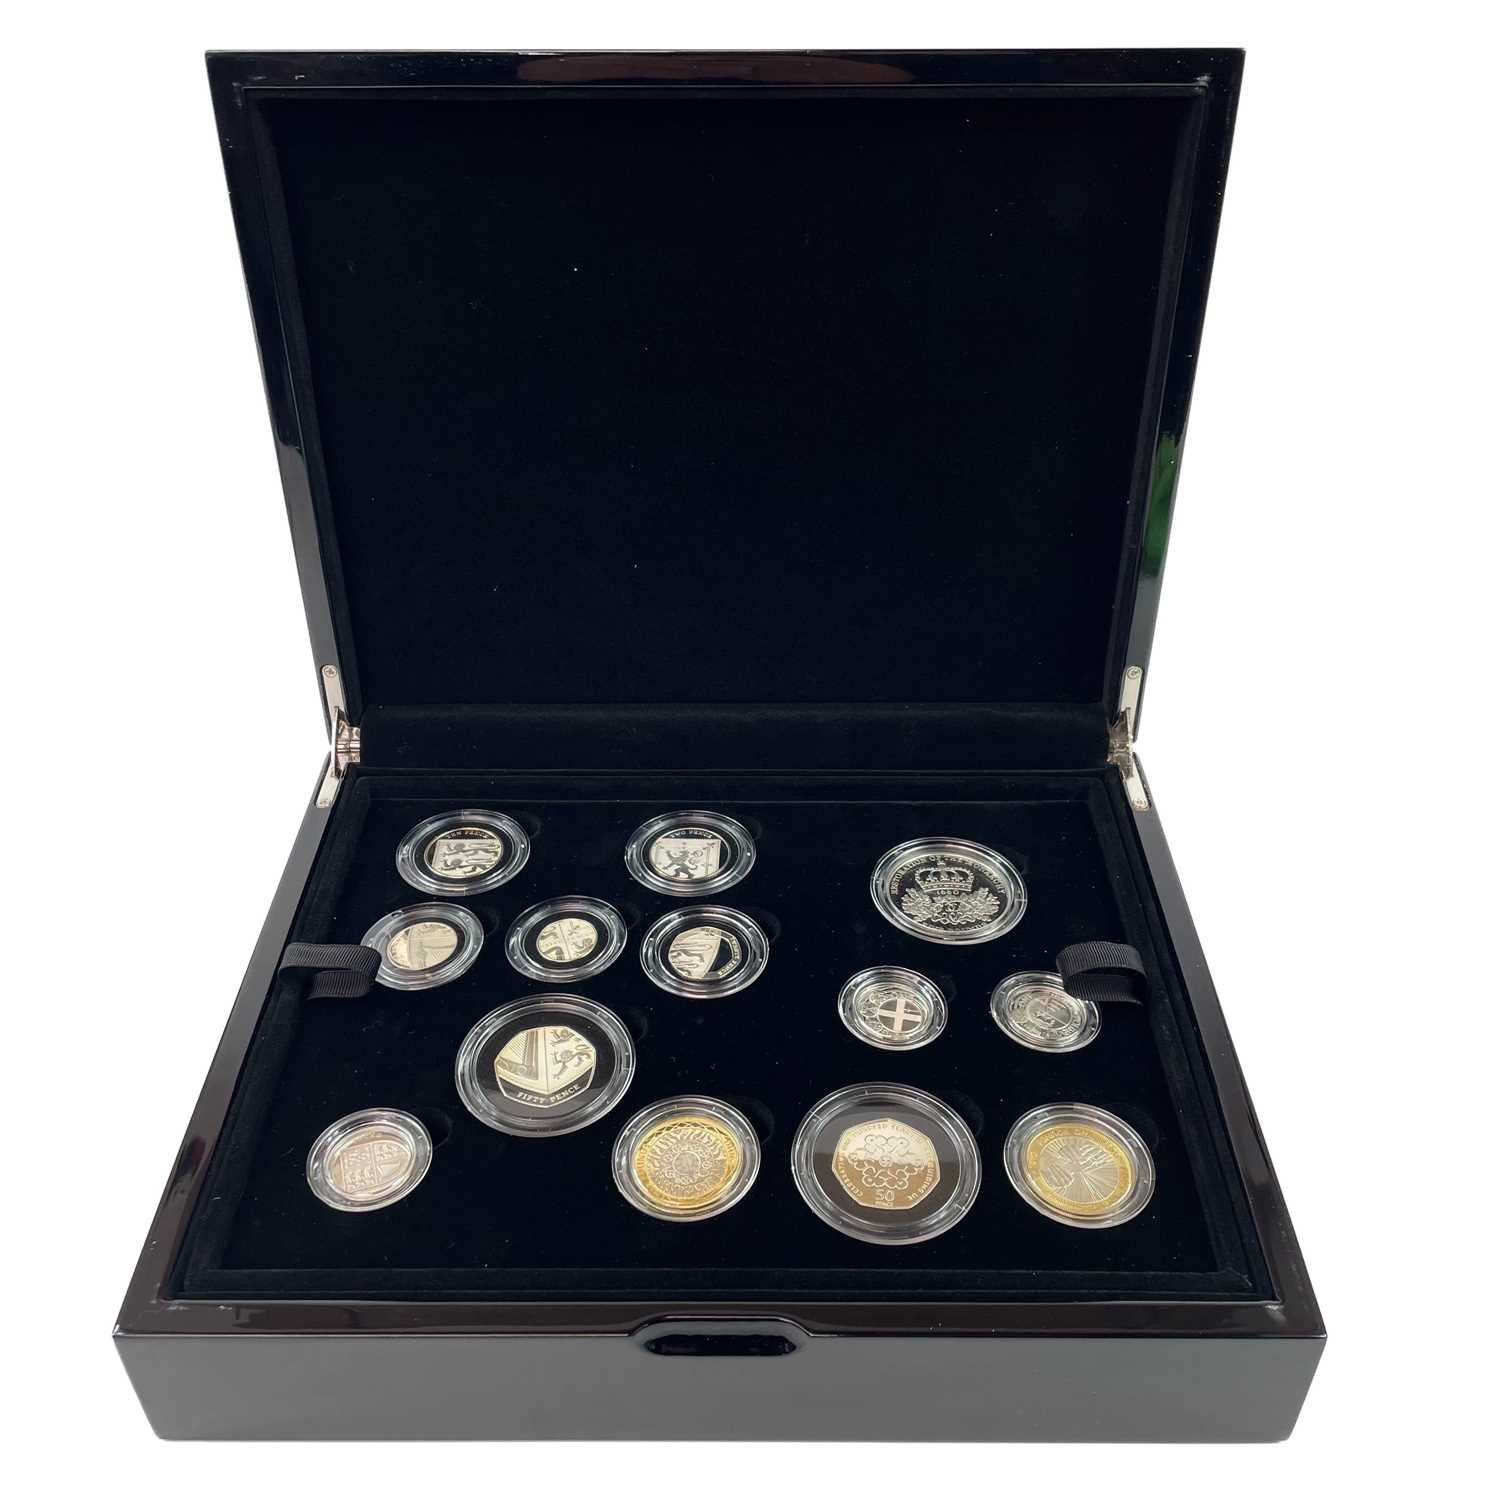 Lot 89 - Royal Mint Great Britain 2010 UK Silver Proof 13 Coin Set.